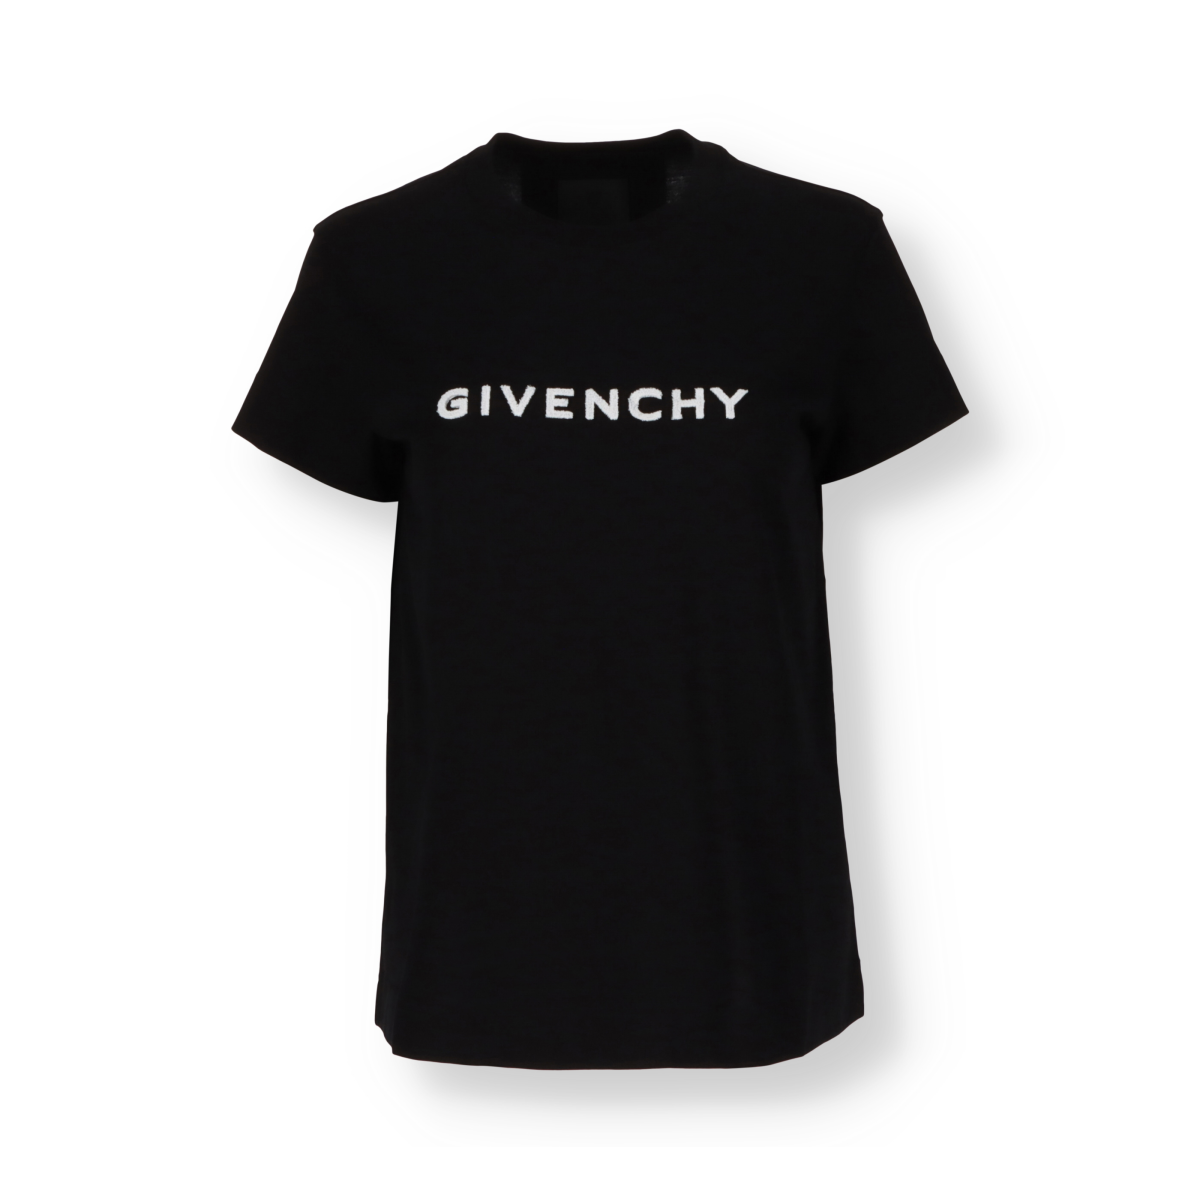 T-shirt Givenchy en relief